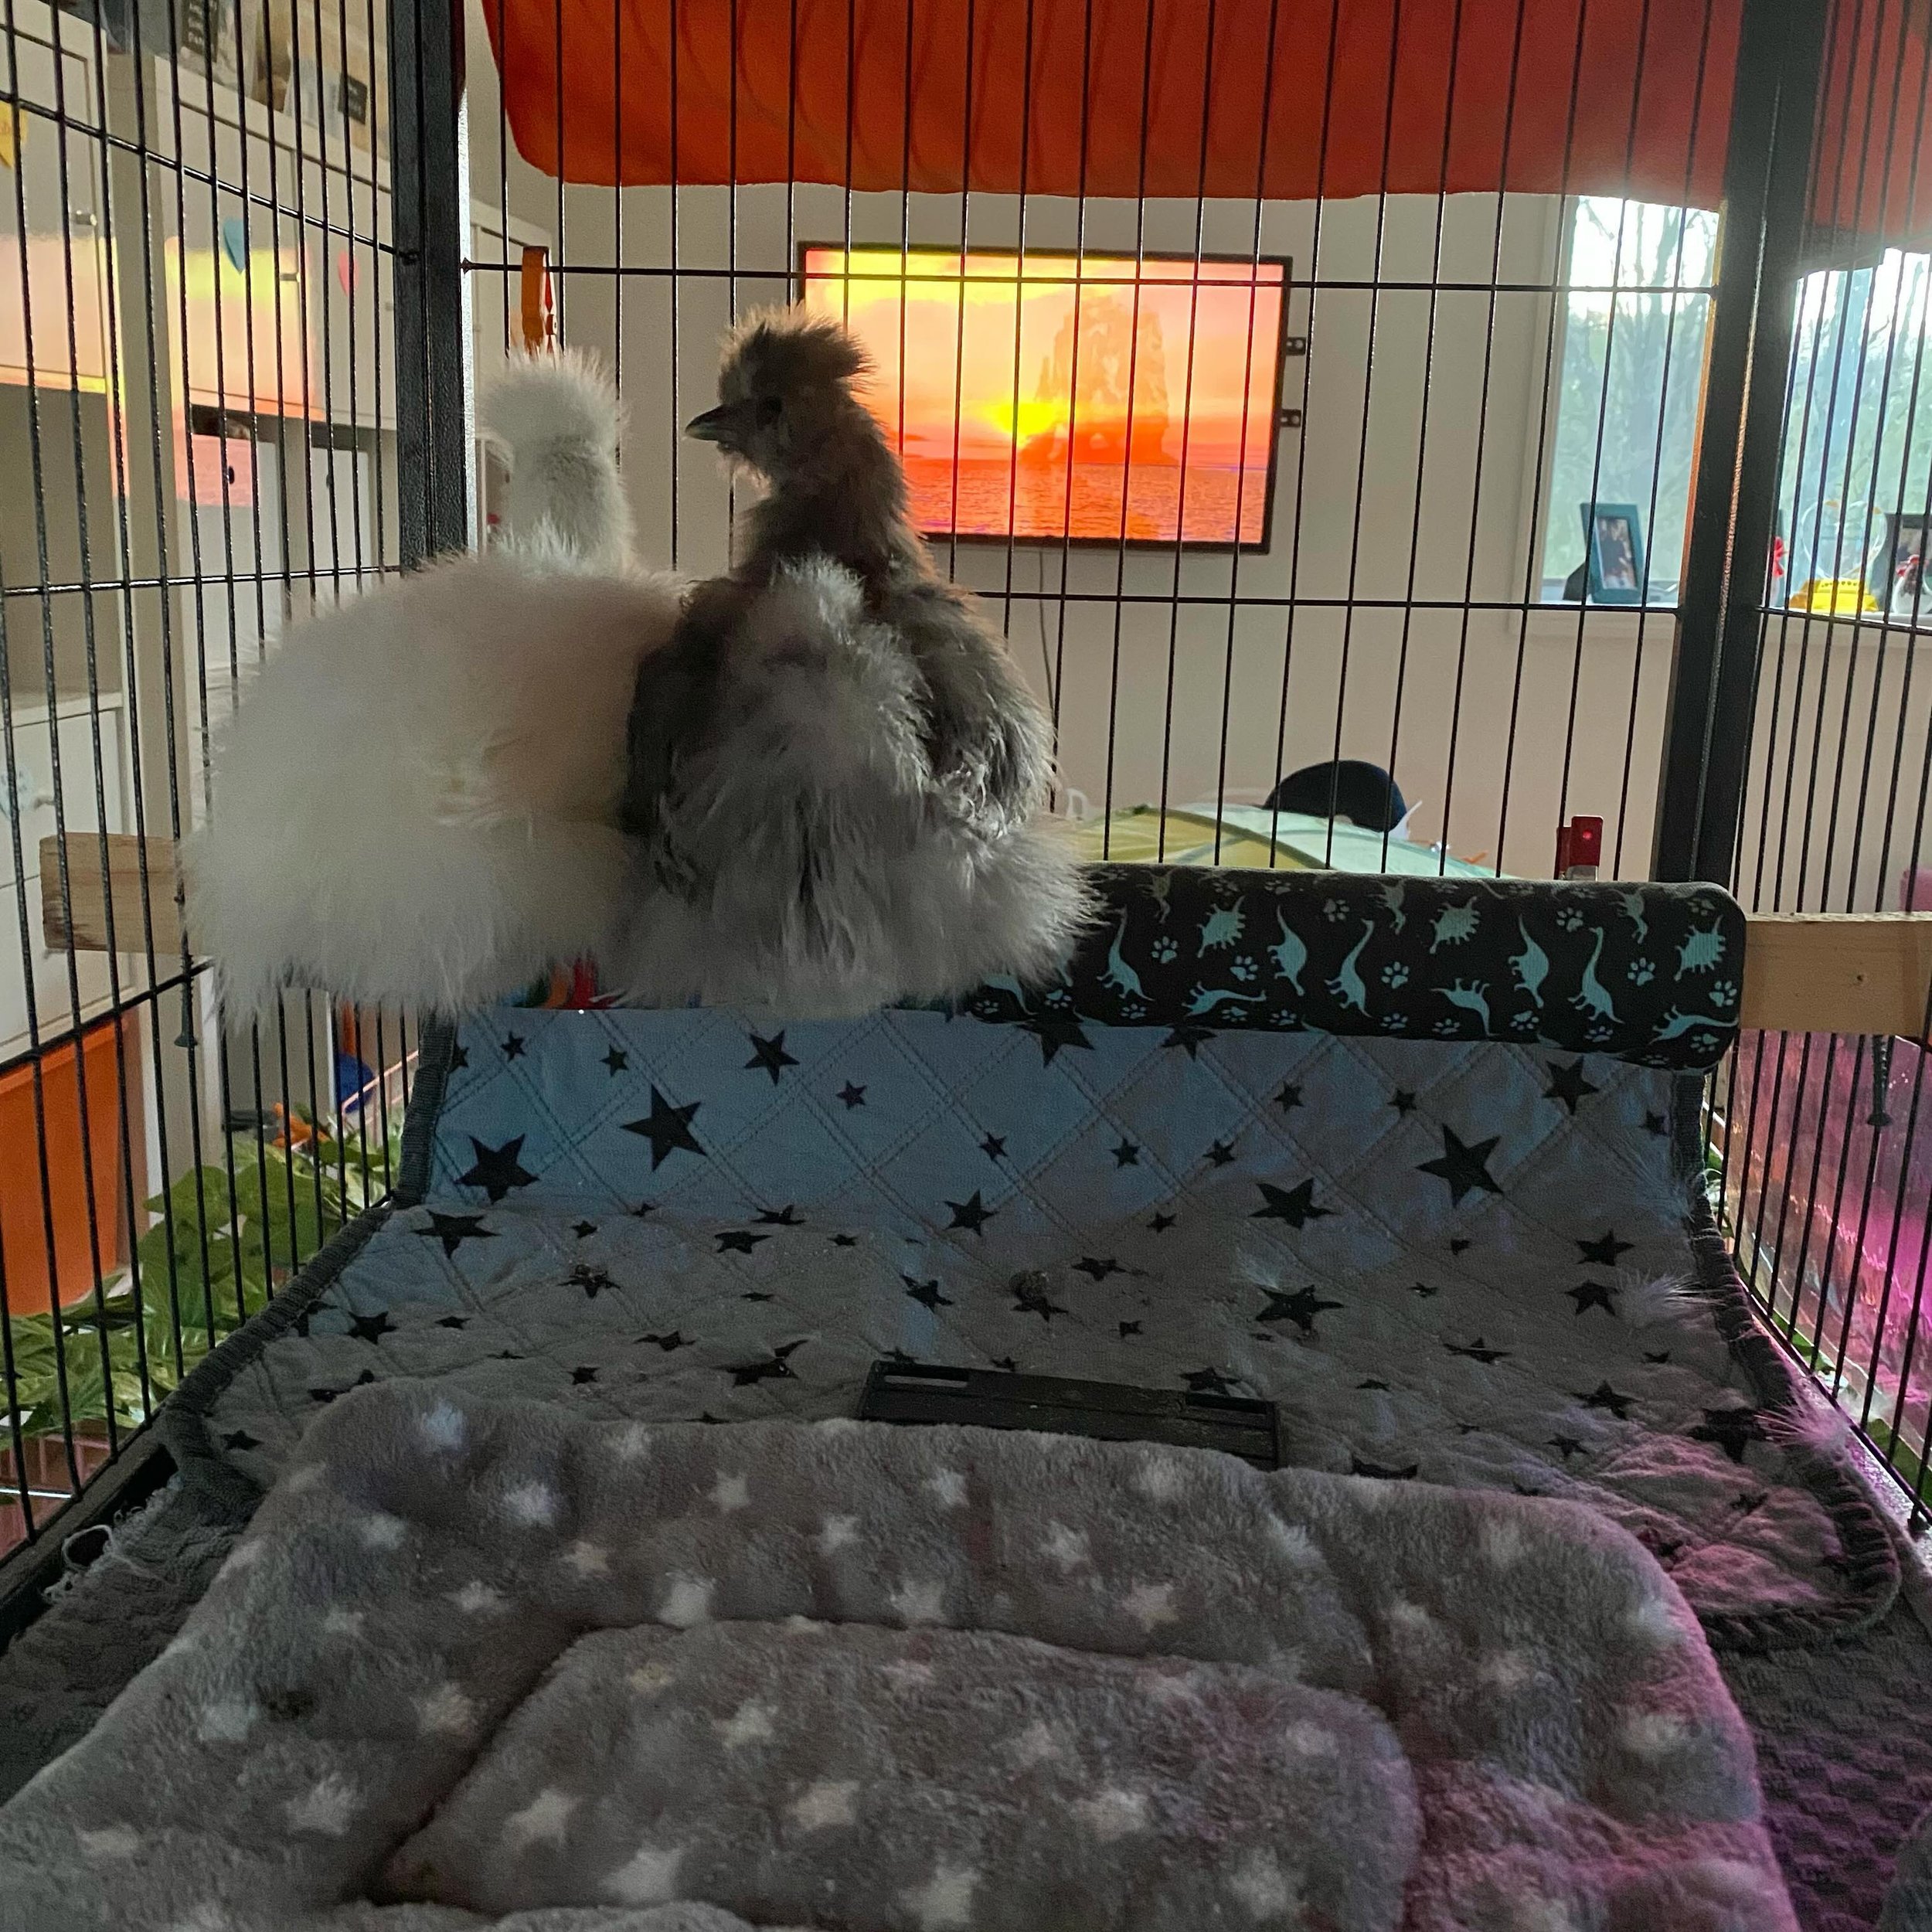 Caught this sweet moment: Captain and Tennille ready for bed on their perch, and there happened to be a sunset on the Special Care Room tv. 💗😭💗🥰

And this is a chance at the end of a long day to say please follow these vegan activist and educator